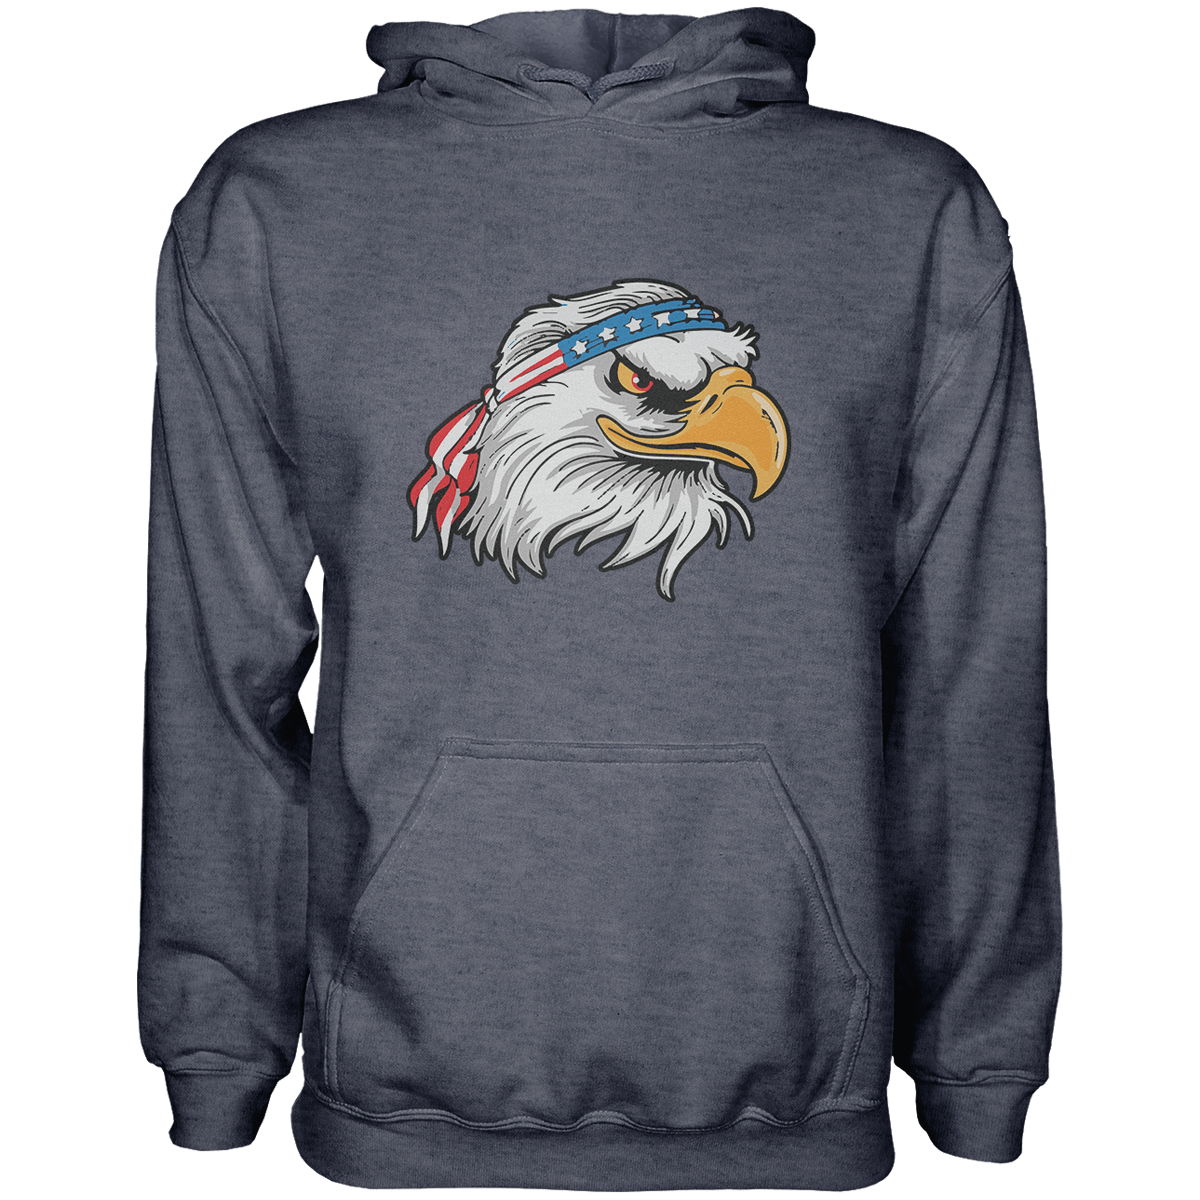 Thumbnail for Merican Eagle Hoodie - Greater Half